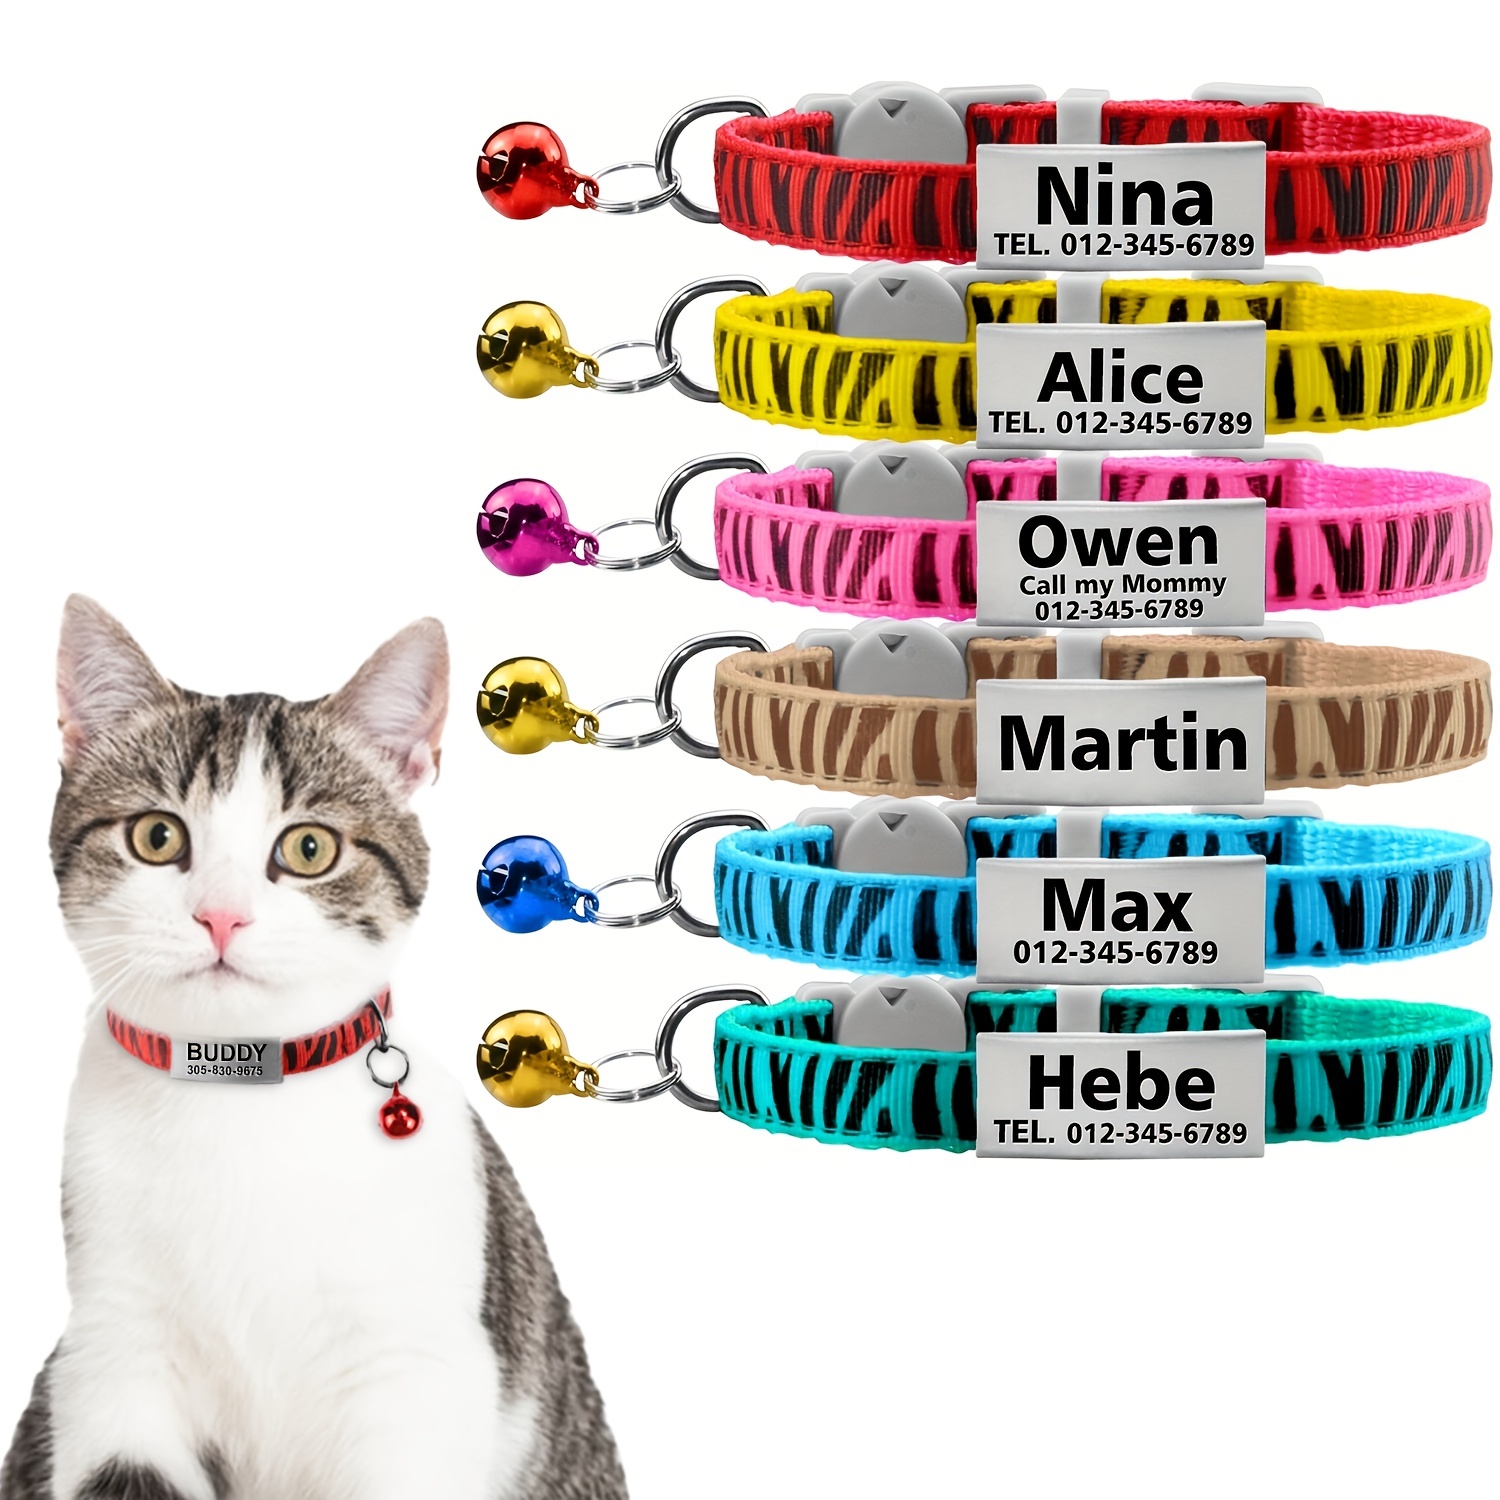 

Personalized Nylon Cat Collar With Breakaway Safety Buckle, Bell, And Custom Name Tag - Adjustable For Kittens And Cats - Keep Your Feline Safe And Stylish!